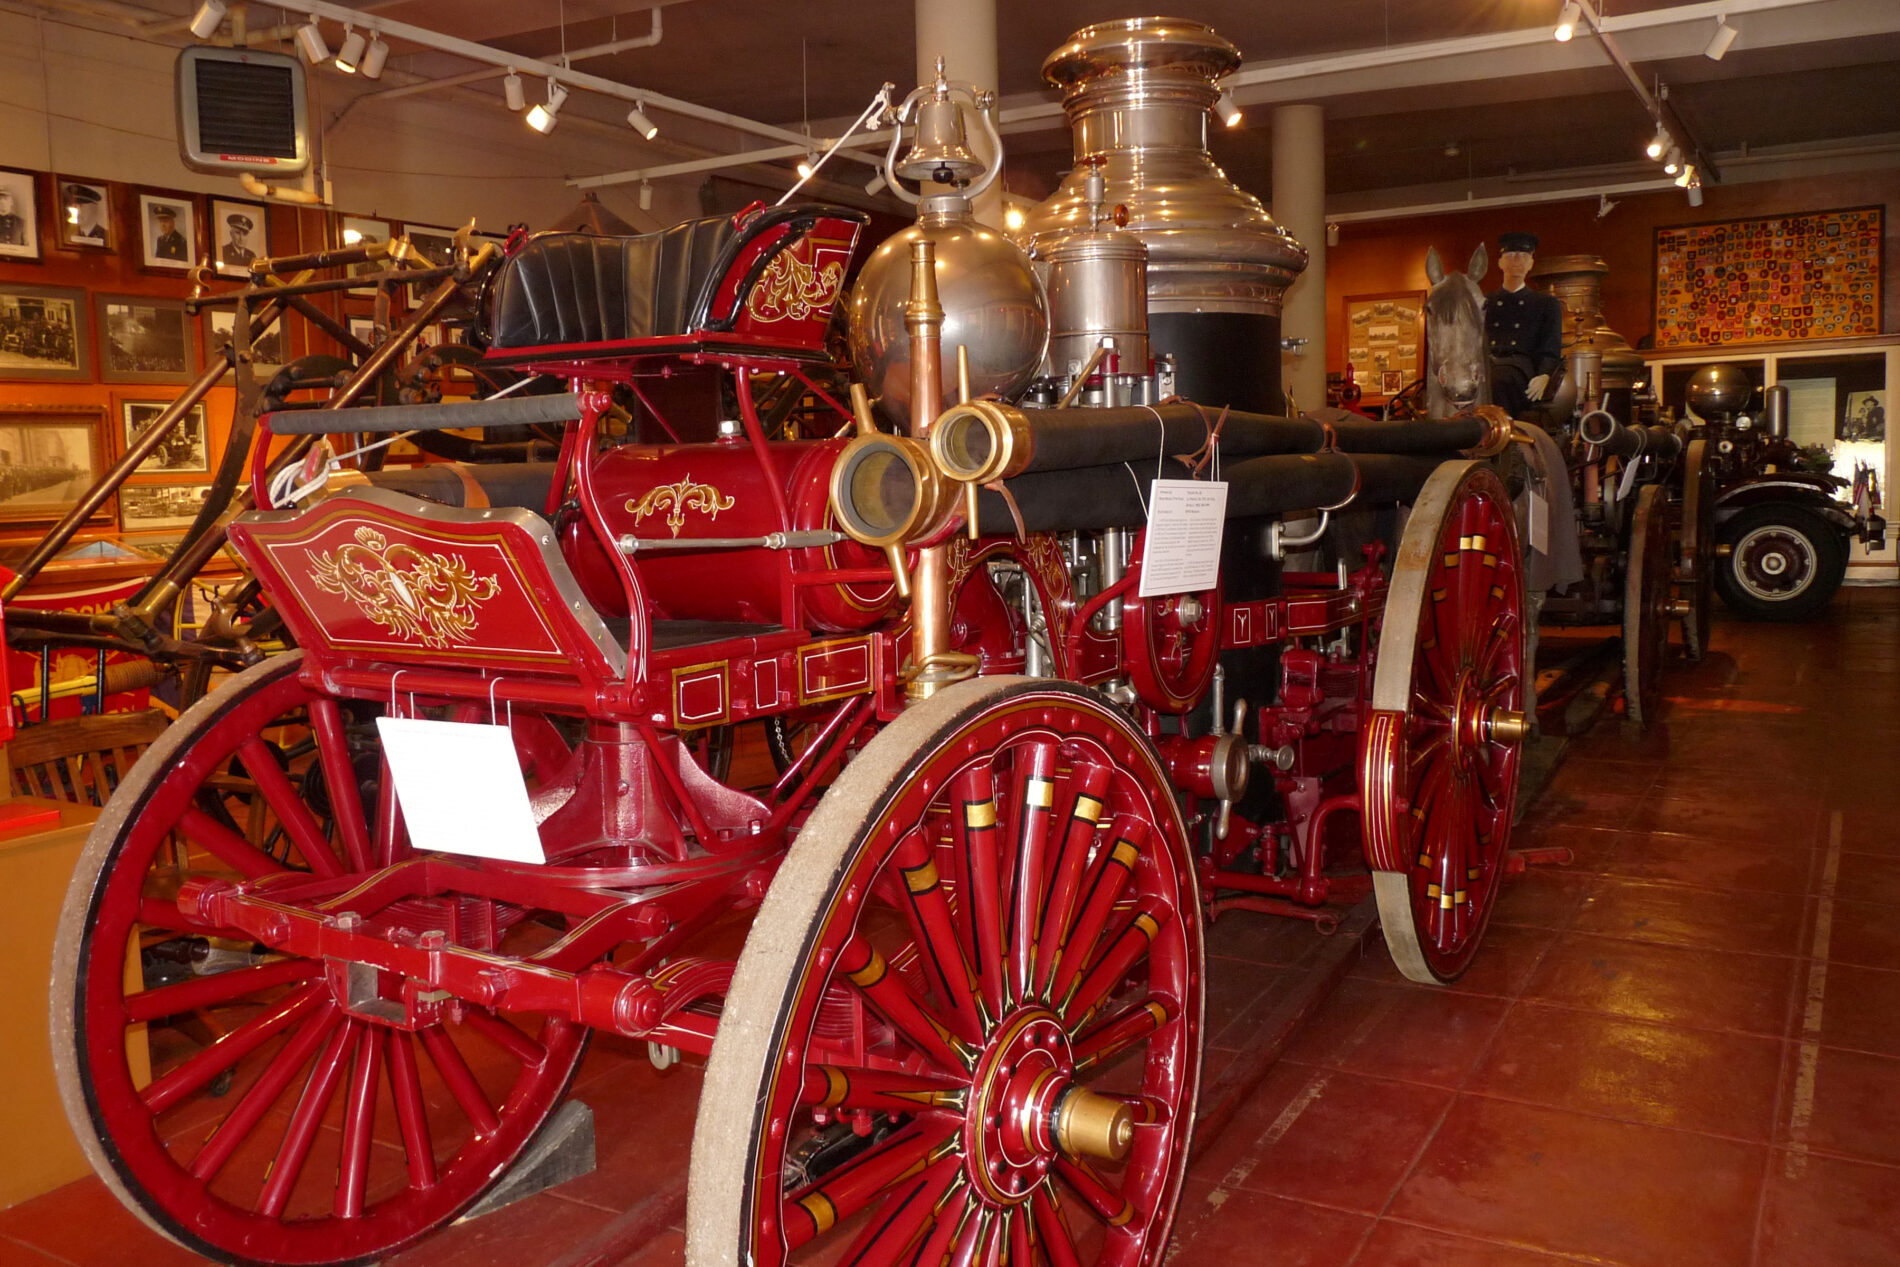 Antique fire wagon Broderick Engine No. 1 at the Fire Department Museum in San Francisco. It was built in 1855.